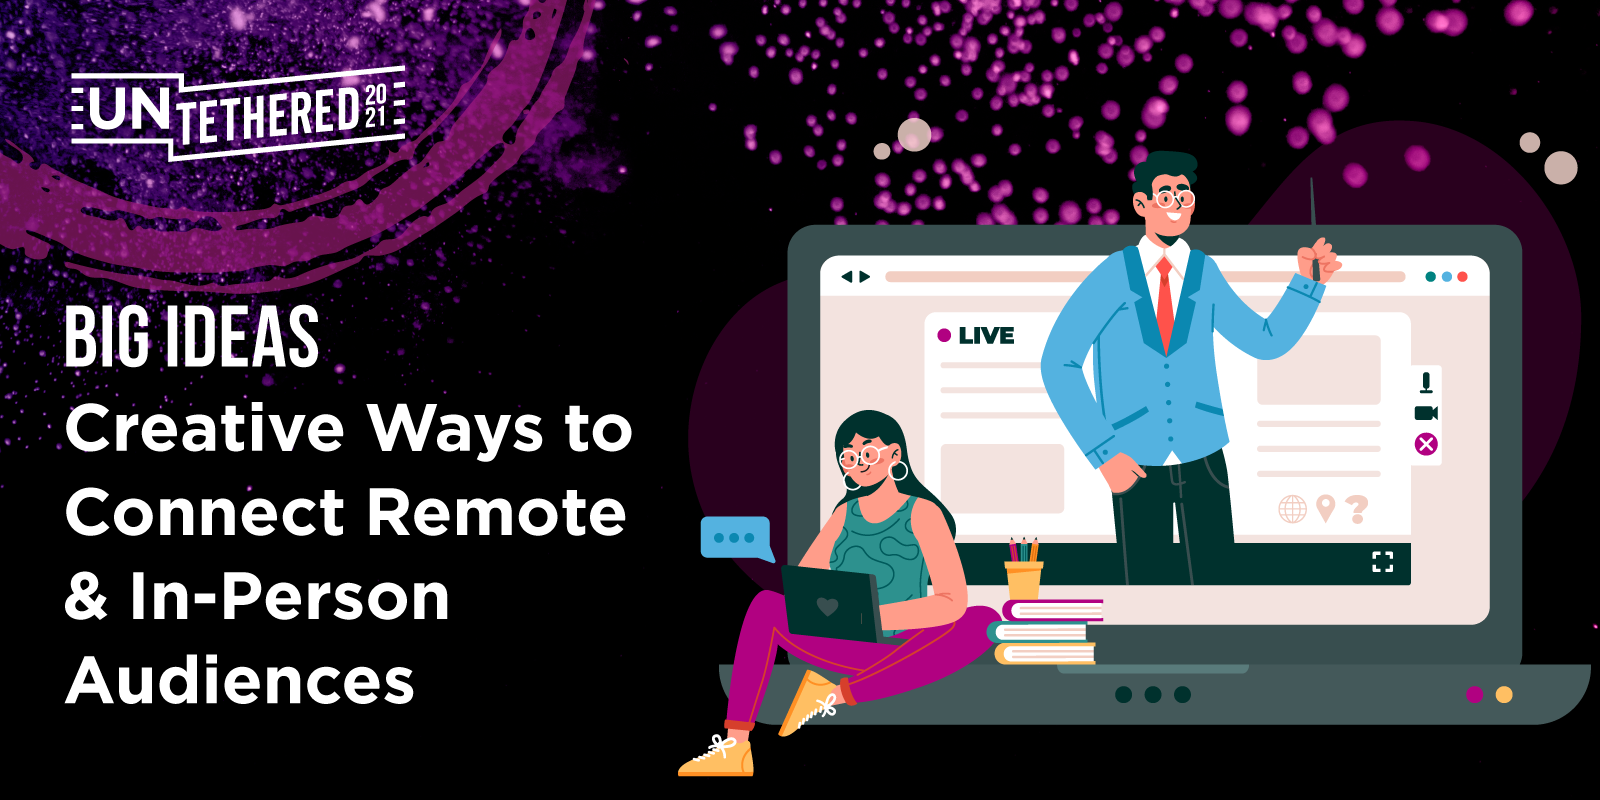 Creative Ways to Connect Remote & In-Person Audiences